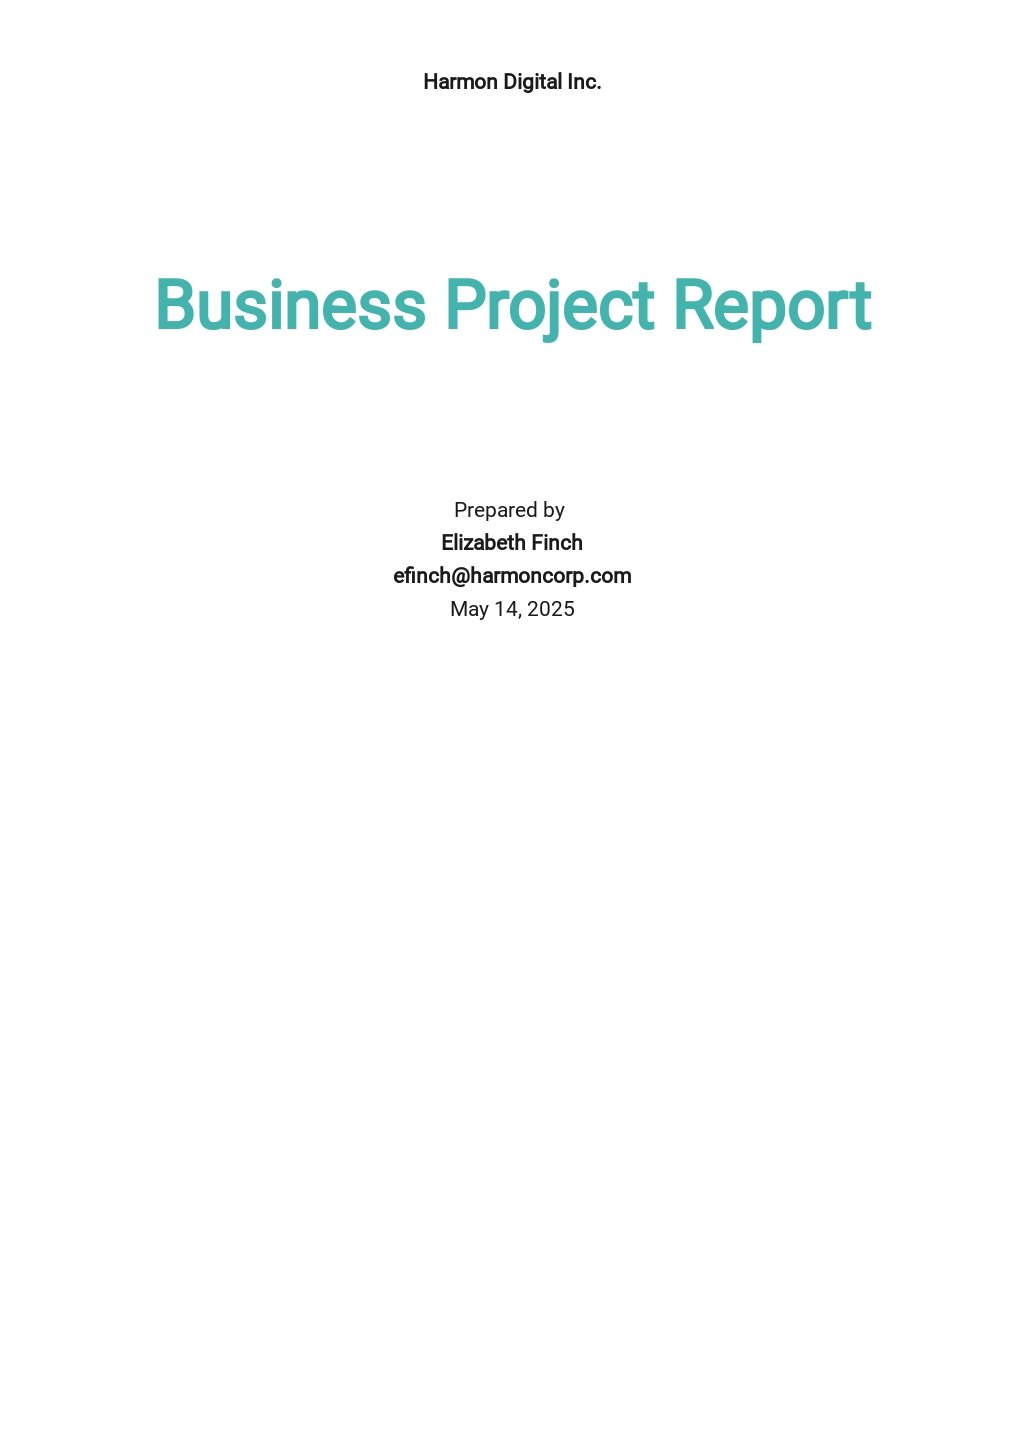 new business project report format